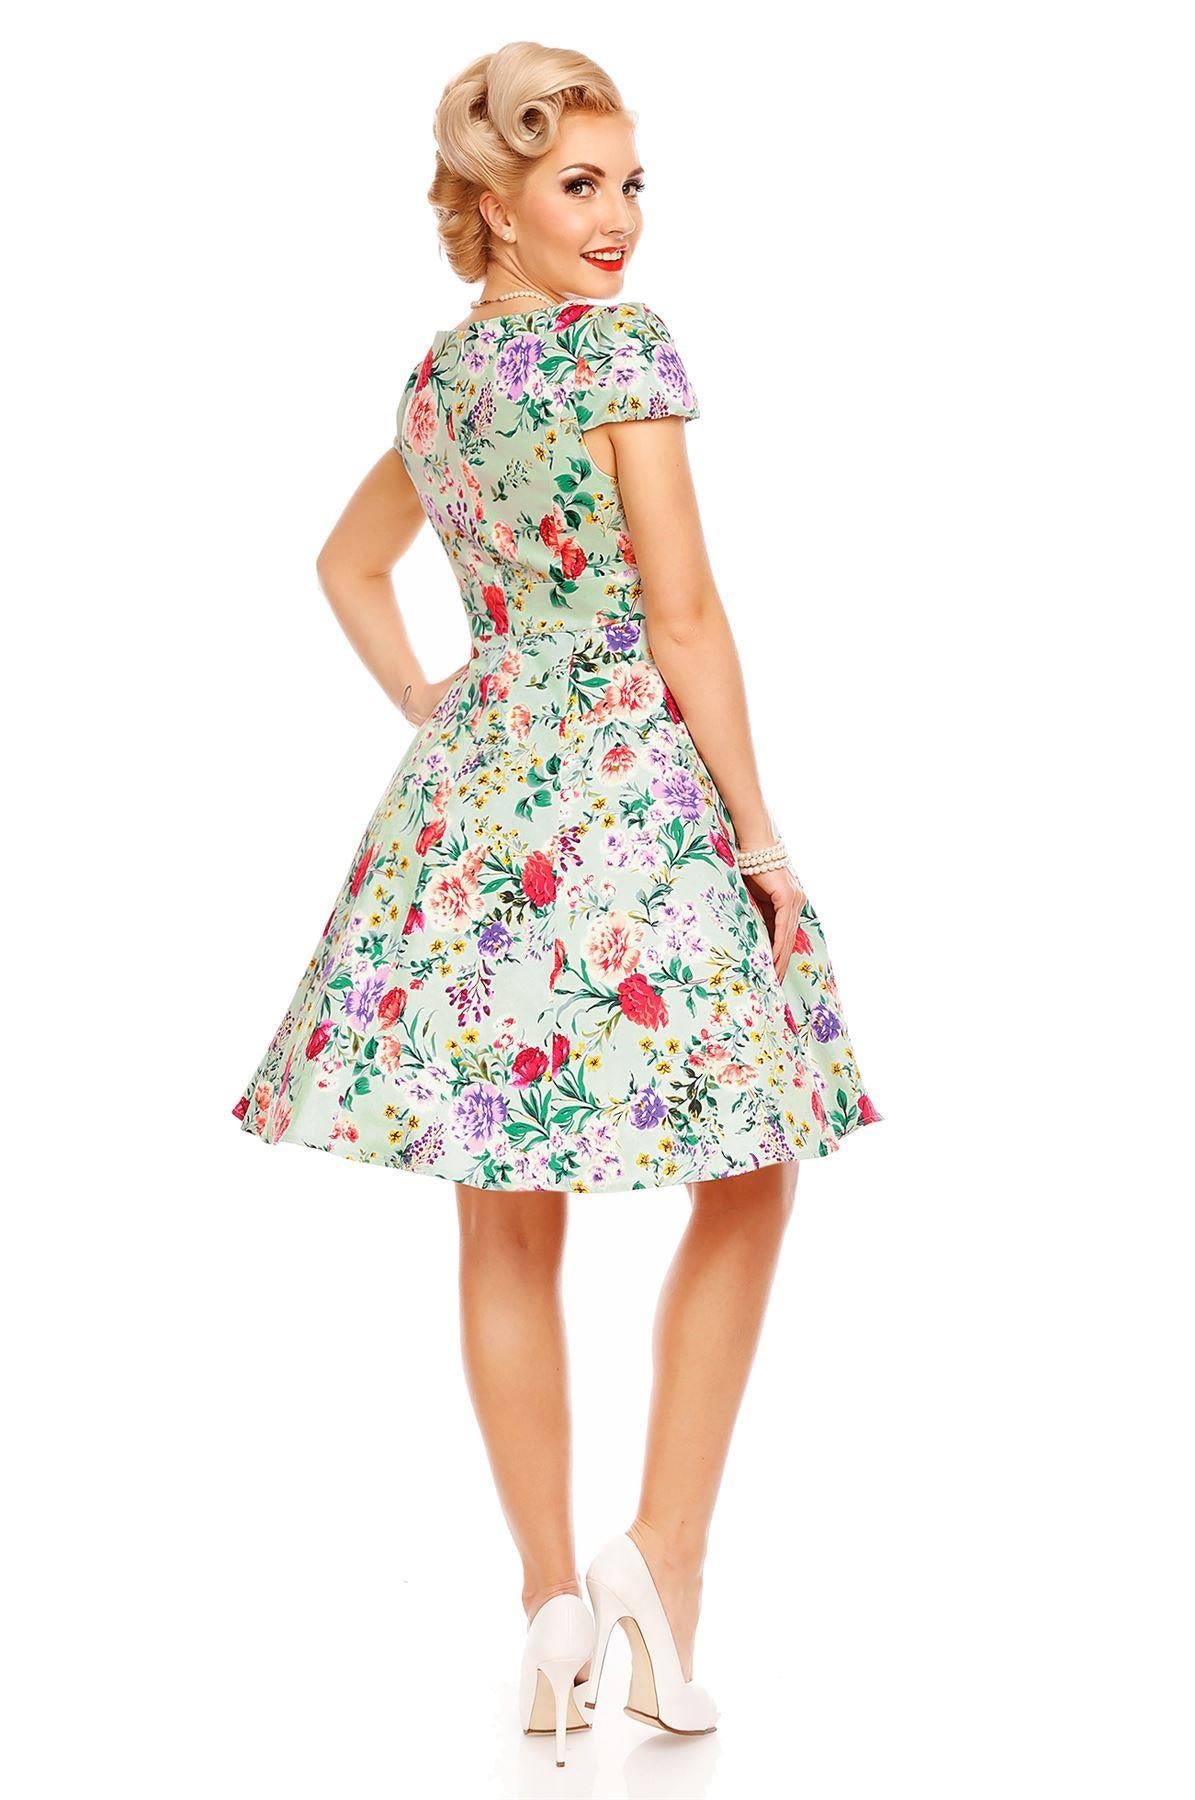 Model wearing Claudia, our short sleeve dress, in green, pink floral print, back view